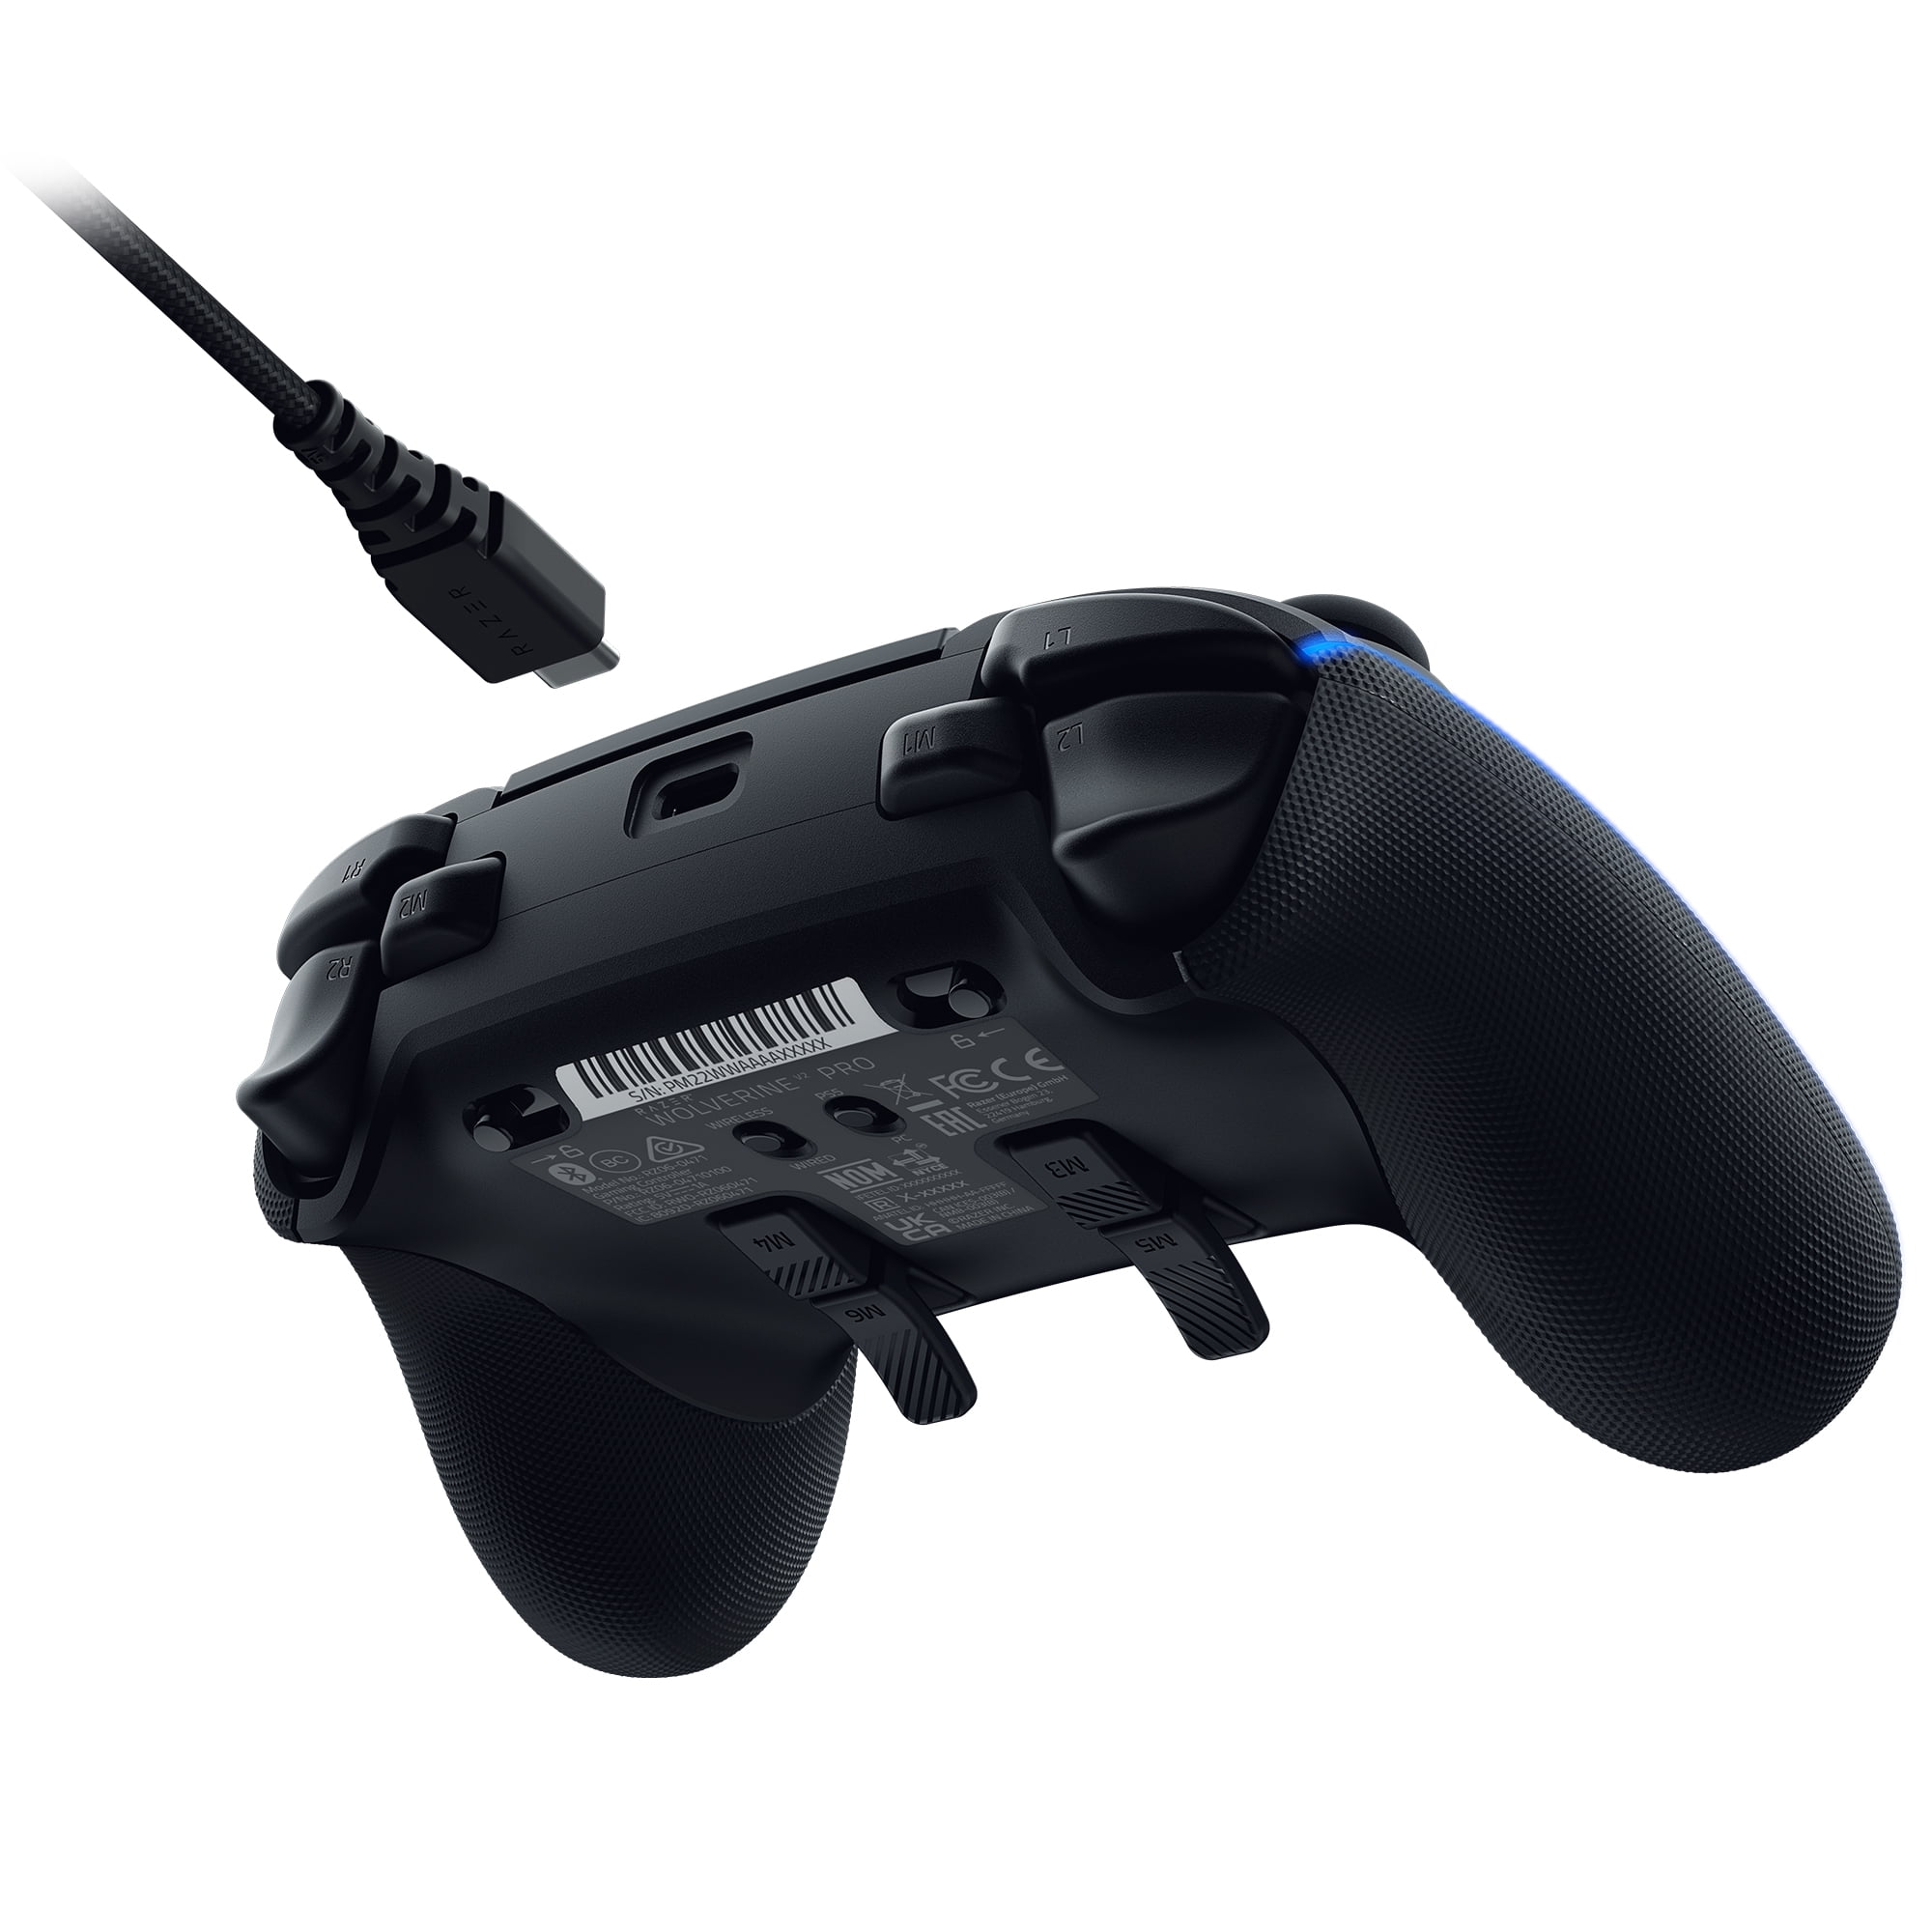 Razer Wolverine V2 Pro Wireless Gaming Controller for PlayStation 5 / PS5,  PC: Mecha-Tactile Action Buttons - 8-Way Microswitch D-Pad - HyperTrigger 